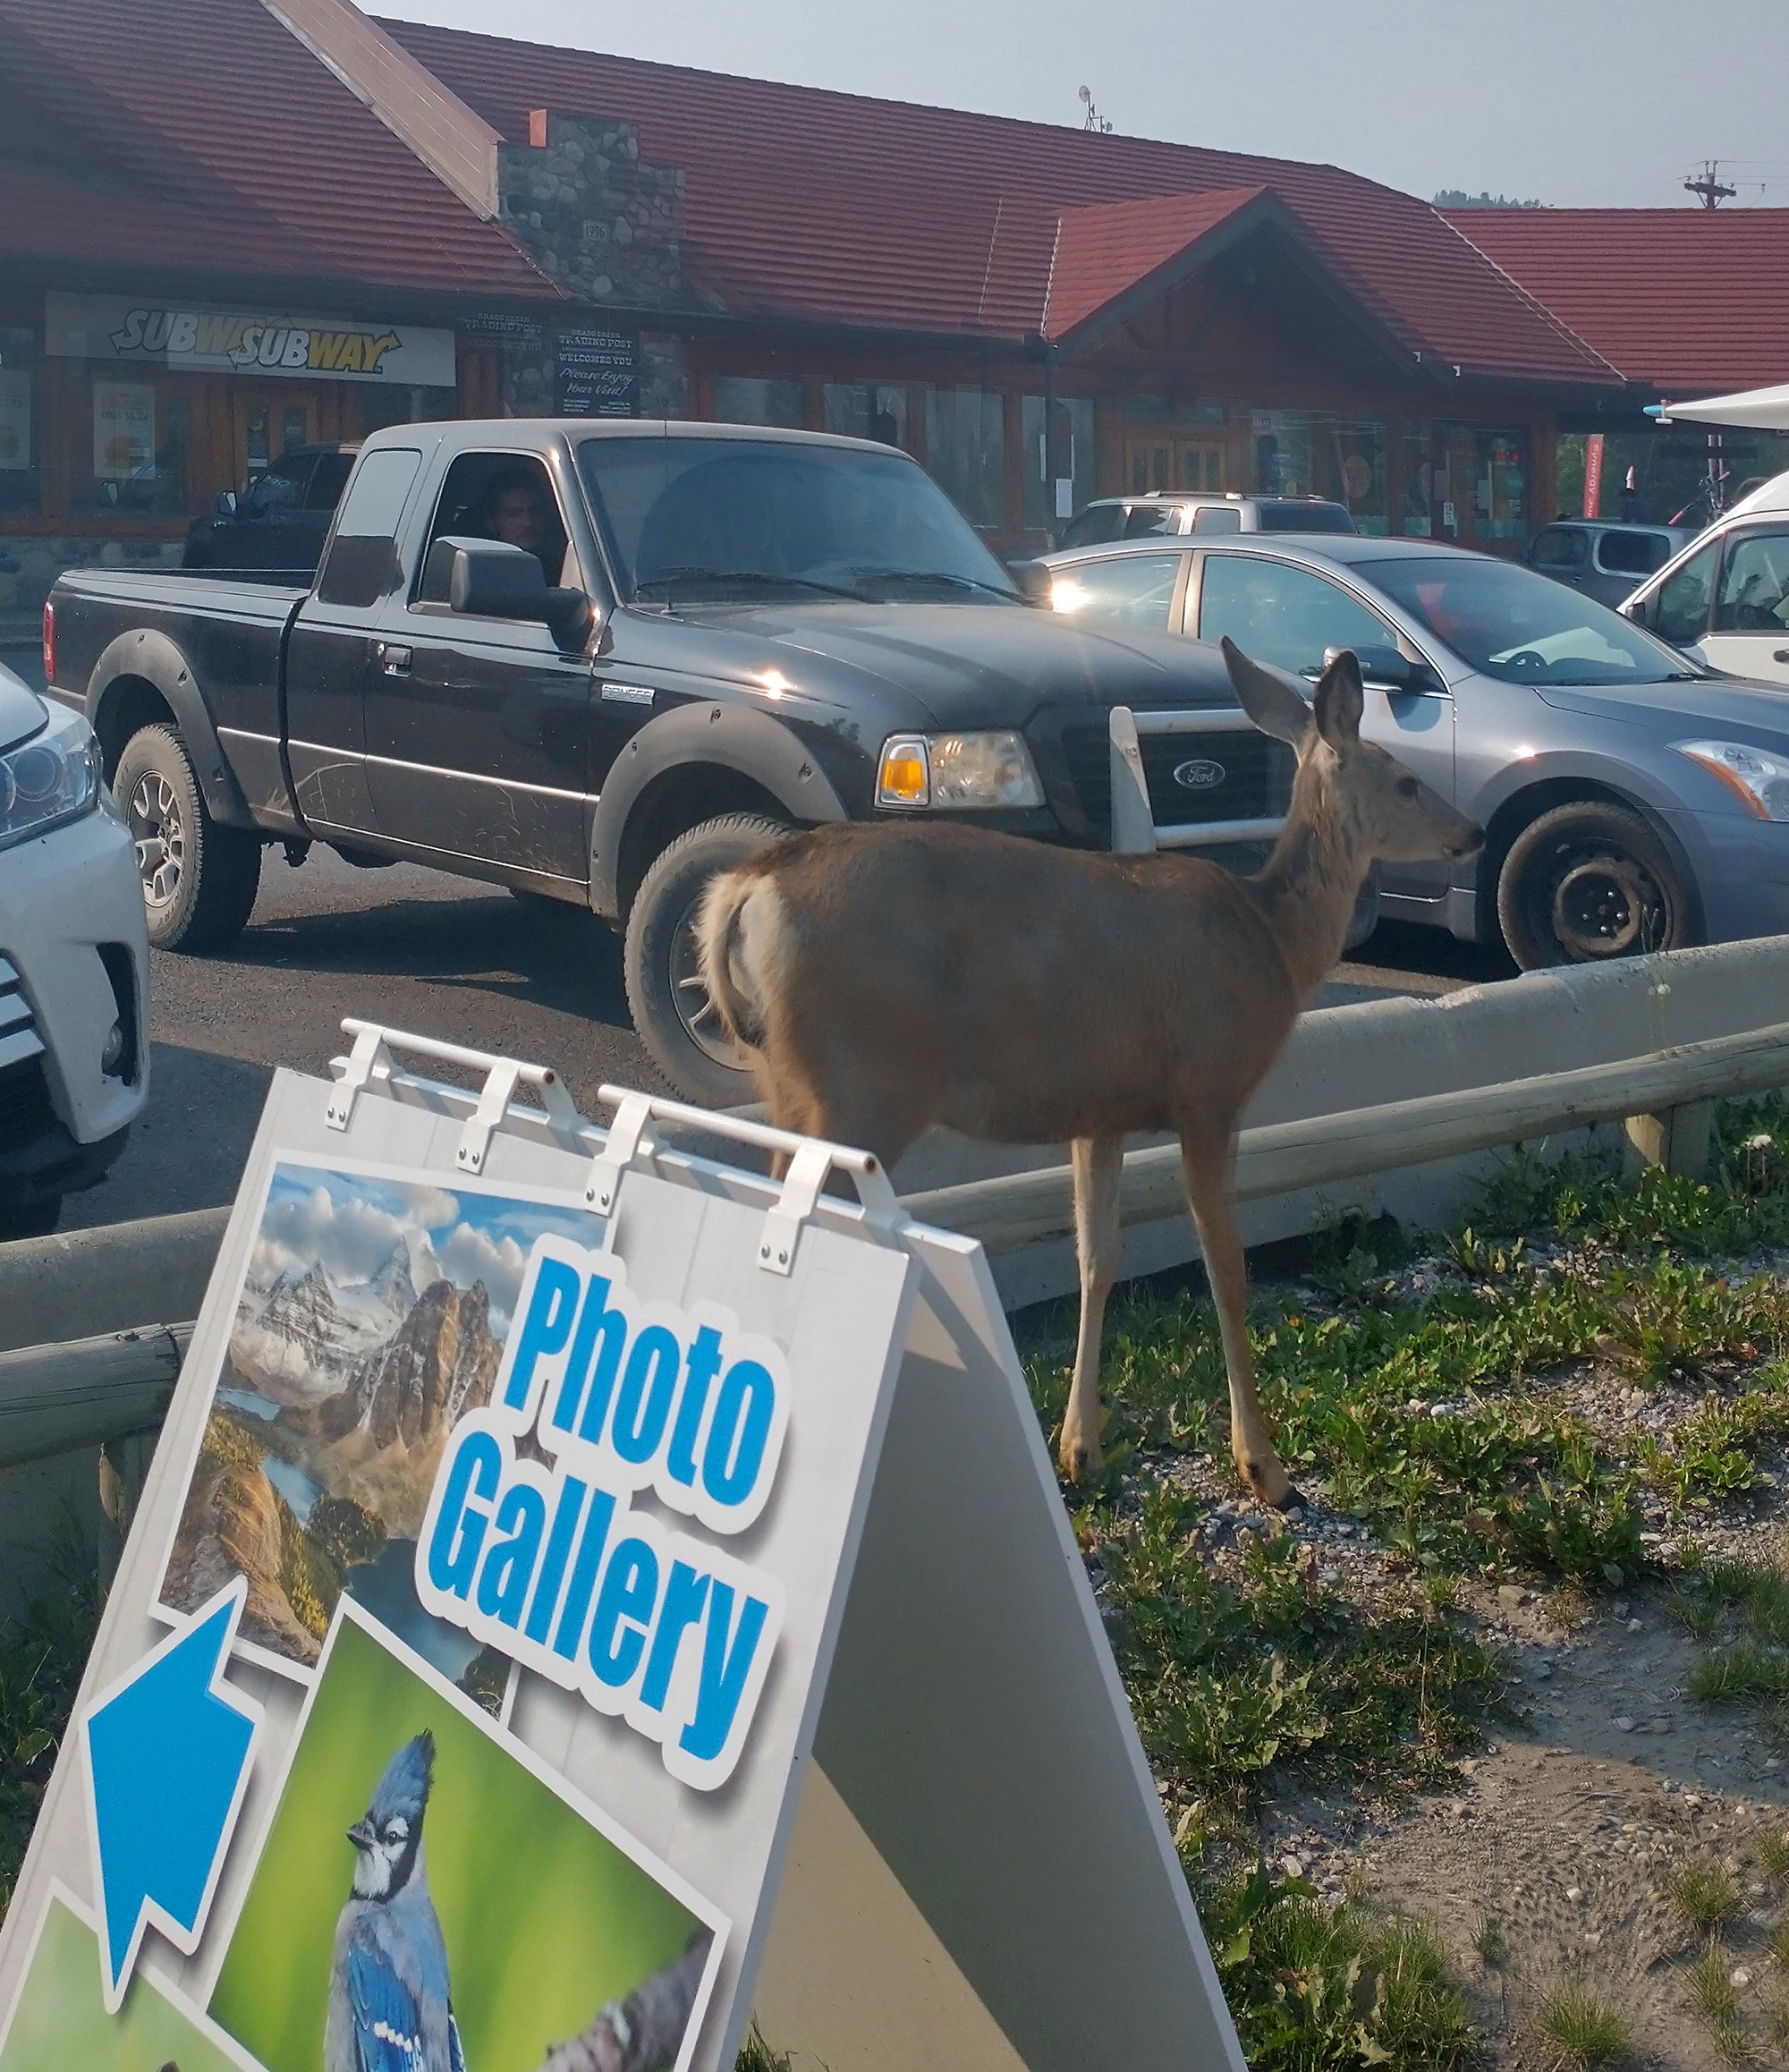 Started the ride with this deer just chilling in the parking lot, on foot away from me.